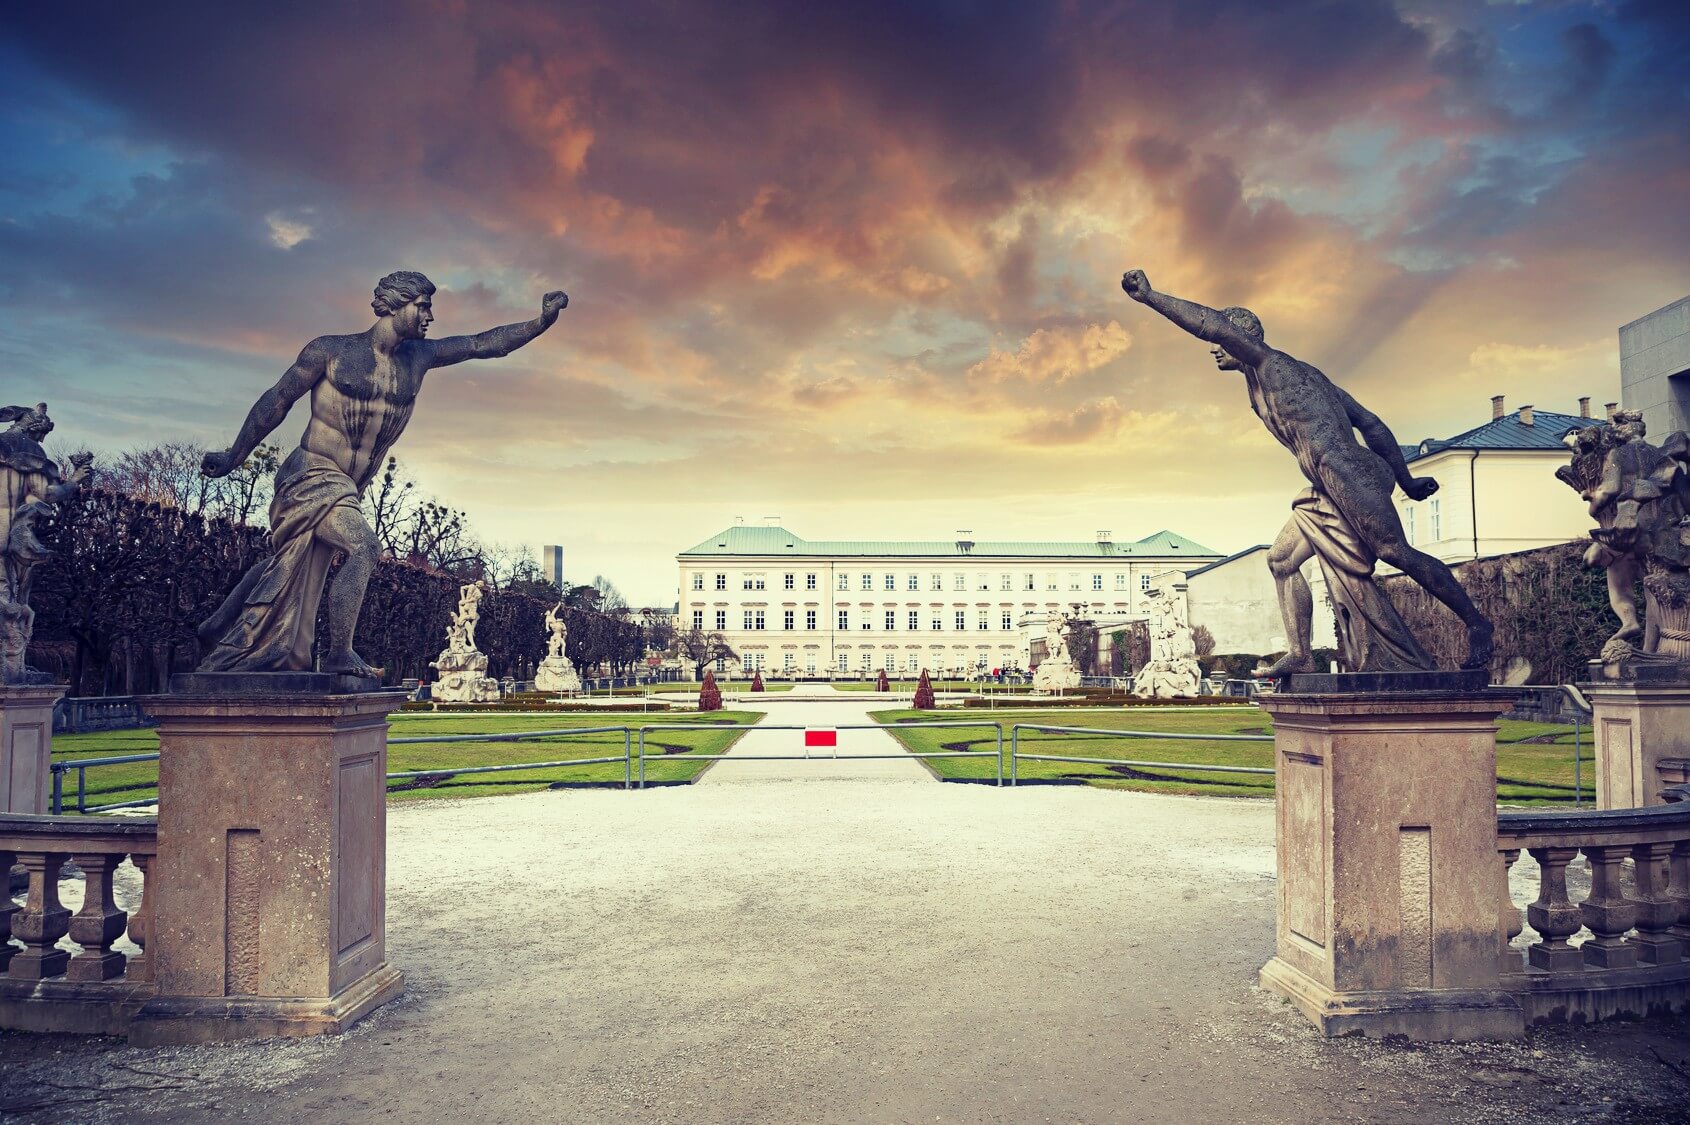 Movie Locations To Visit - Salzburg - Sound Of Music - AssistAnt